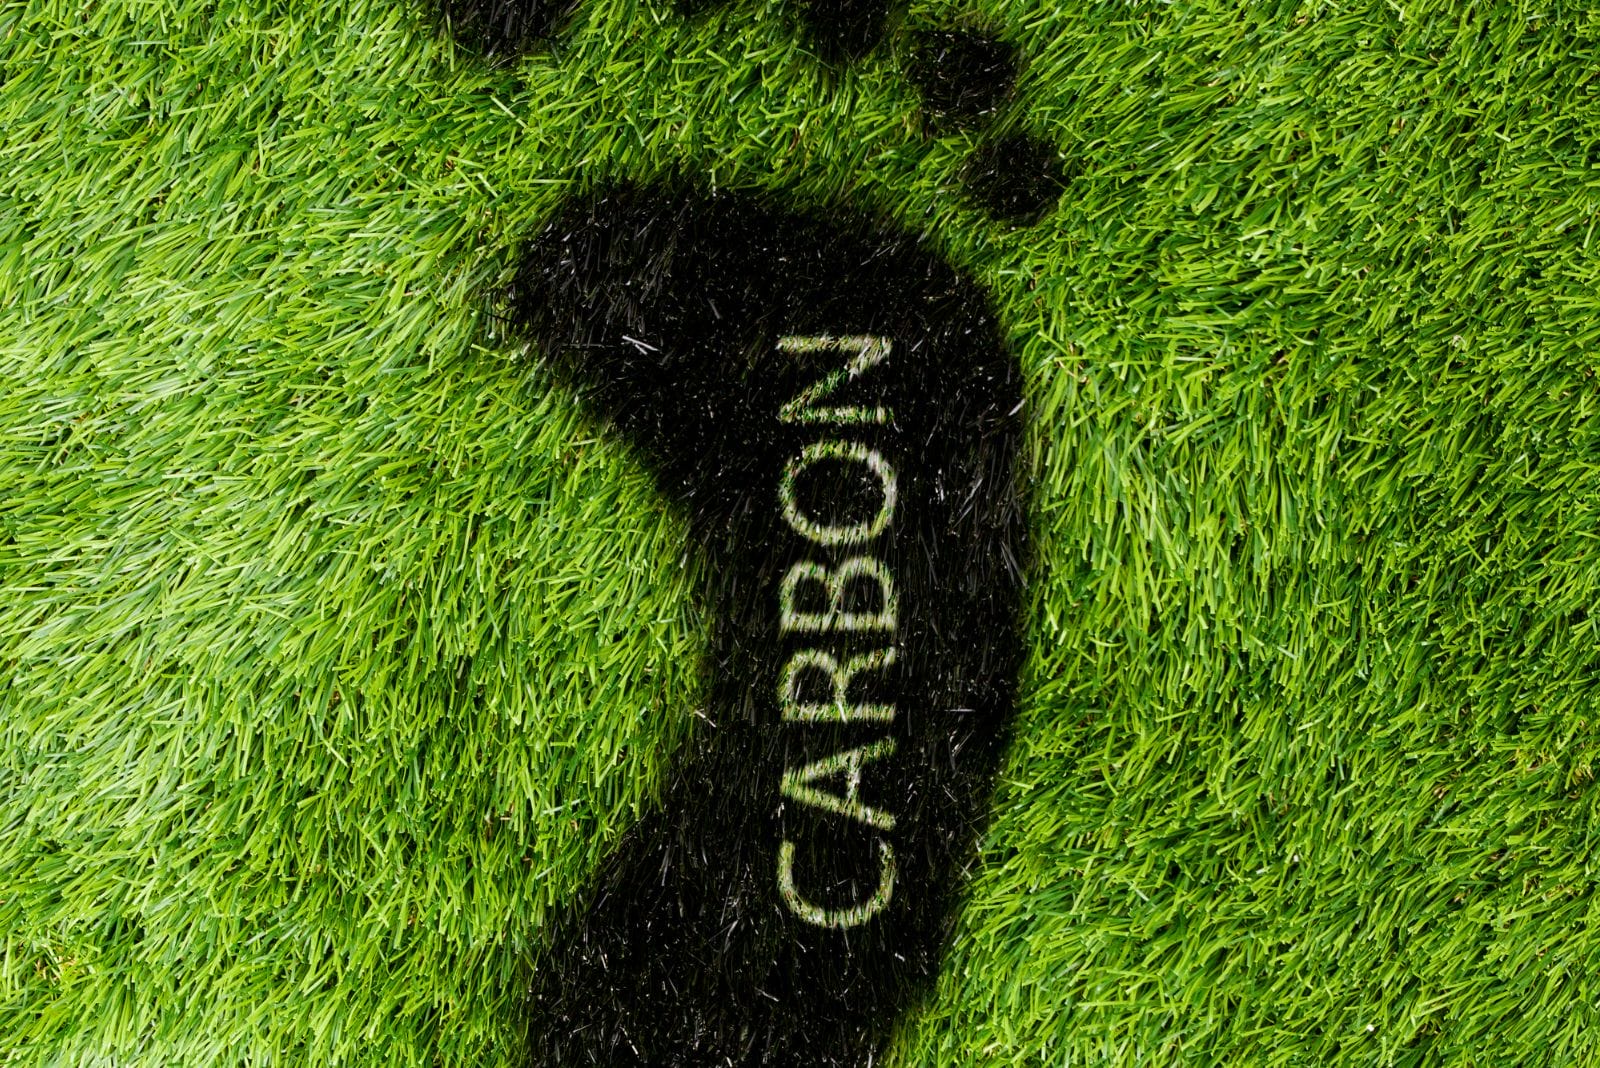 footprint image cut into grass with the word carbon to symbolize sustainability